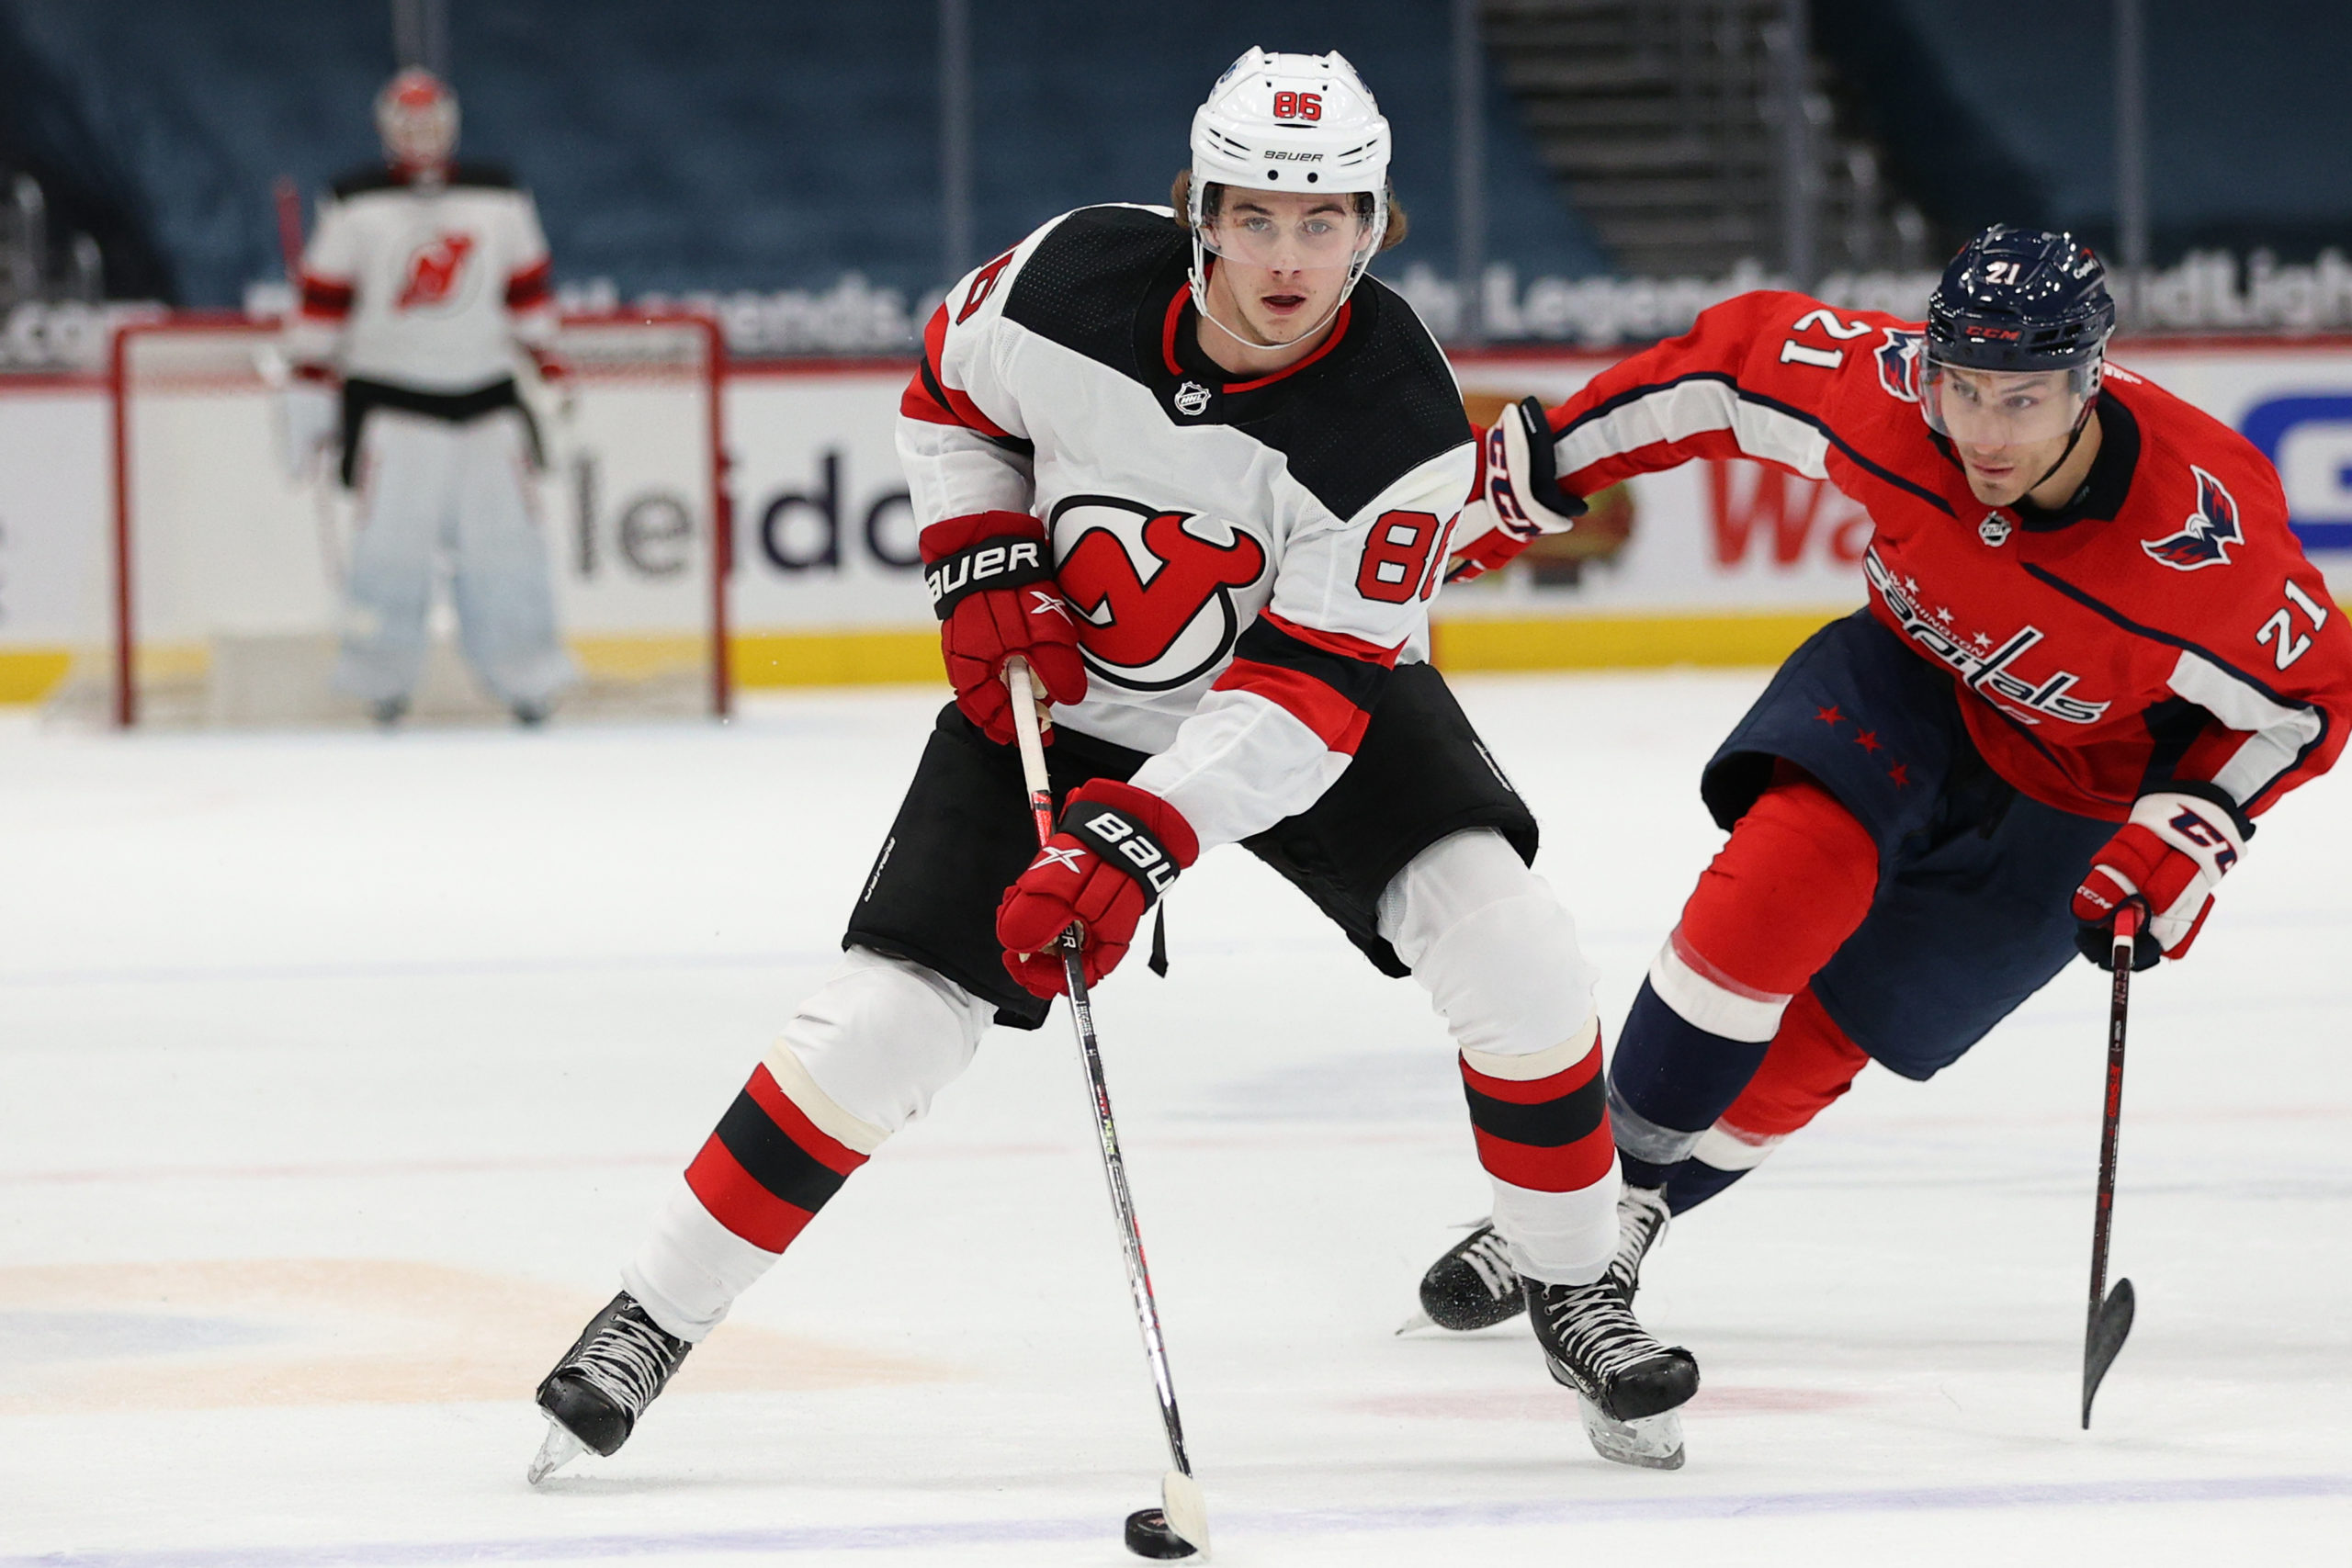 Bill Spaulding - NJ Devils Play-by-Play Voice on MSG Networks